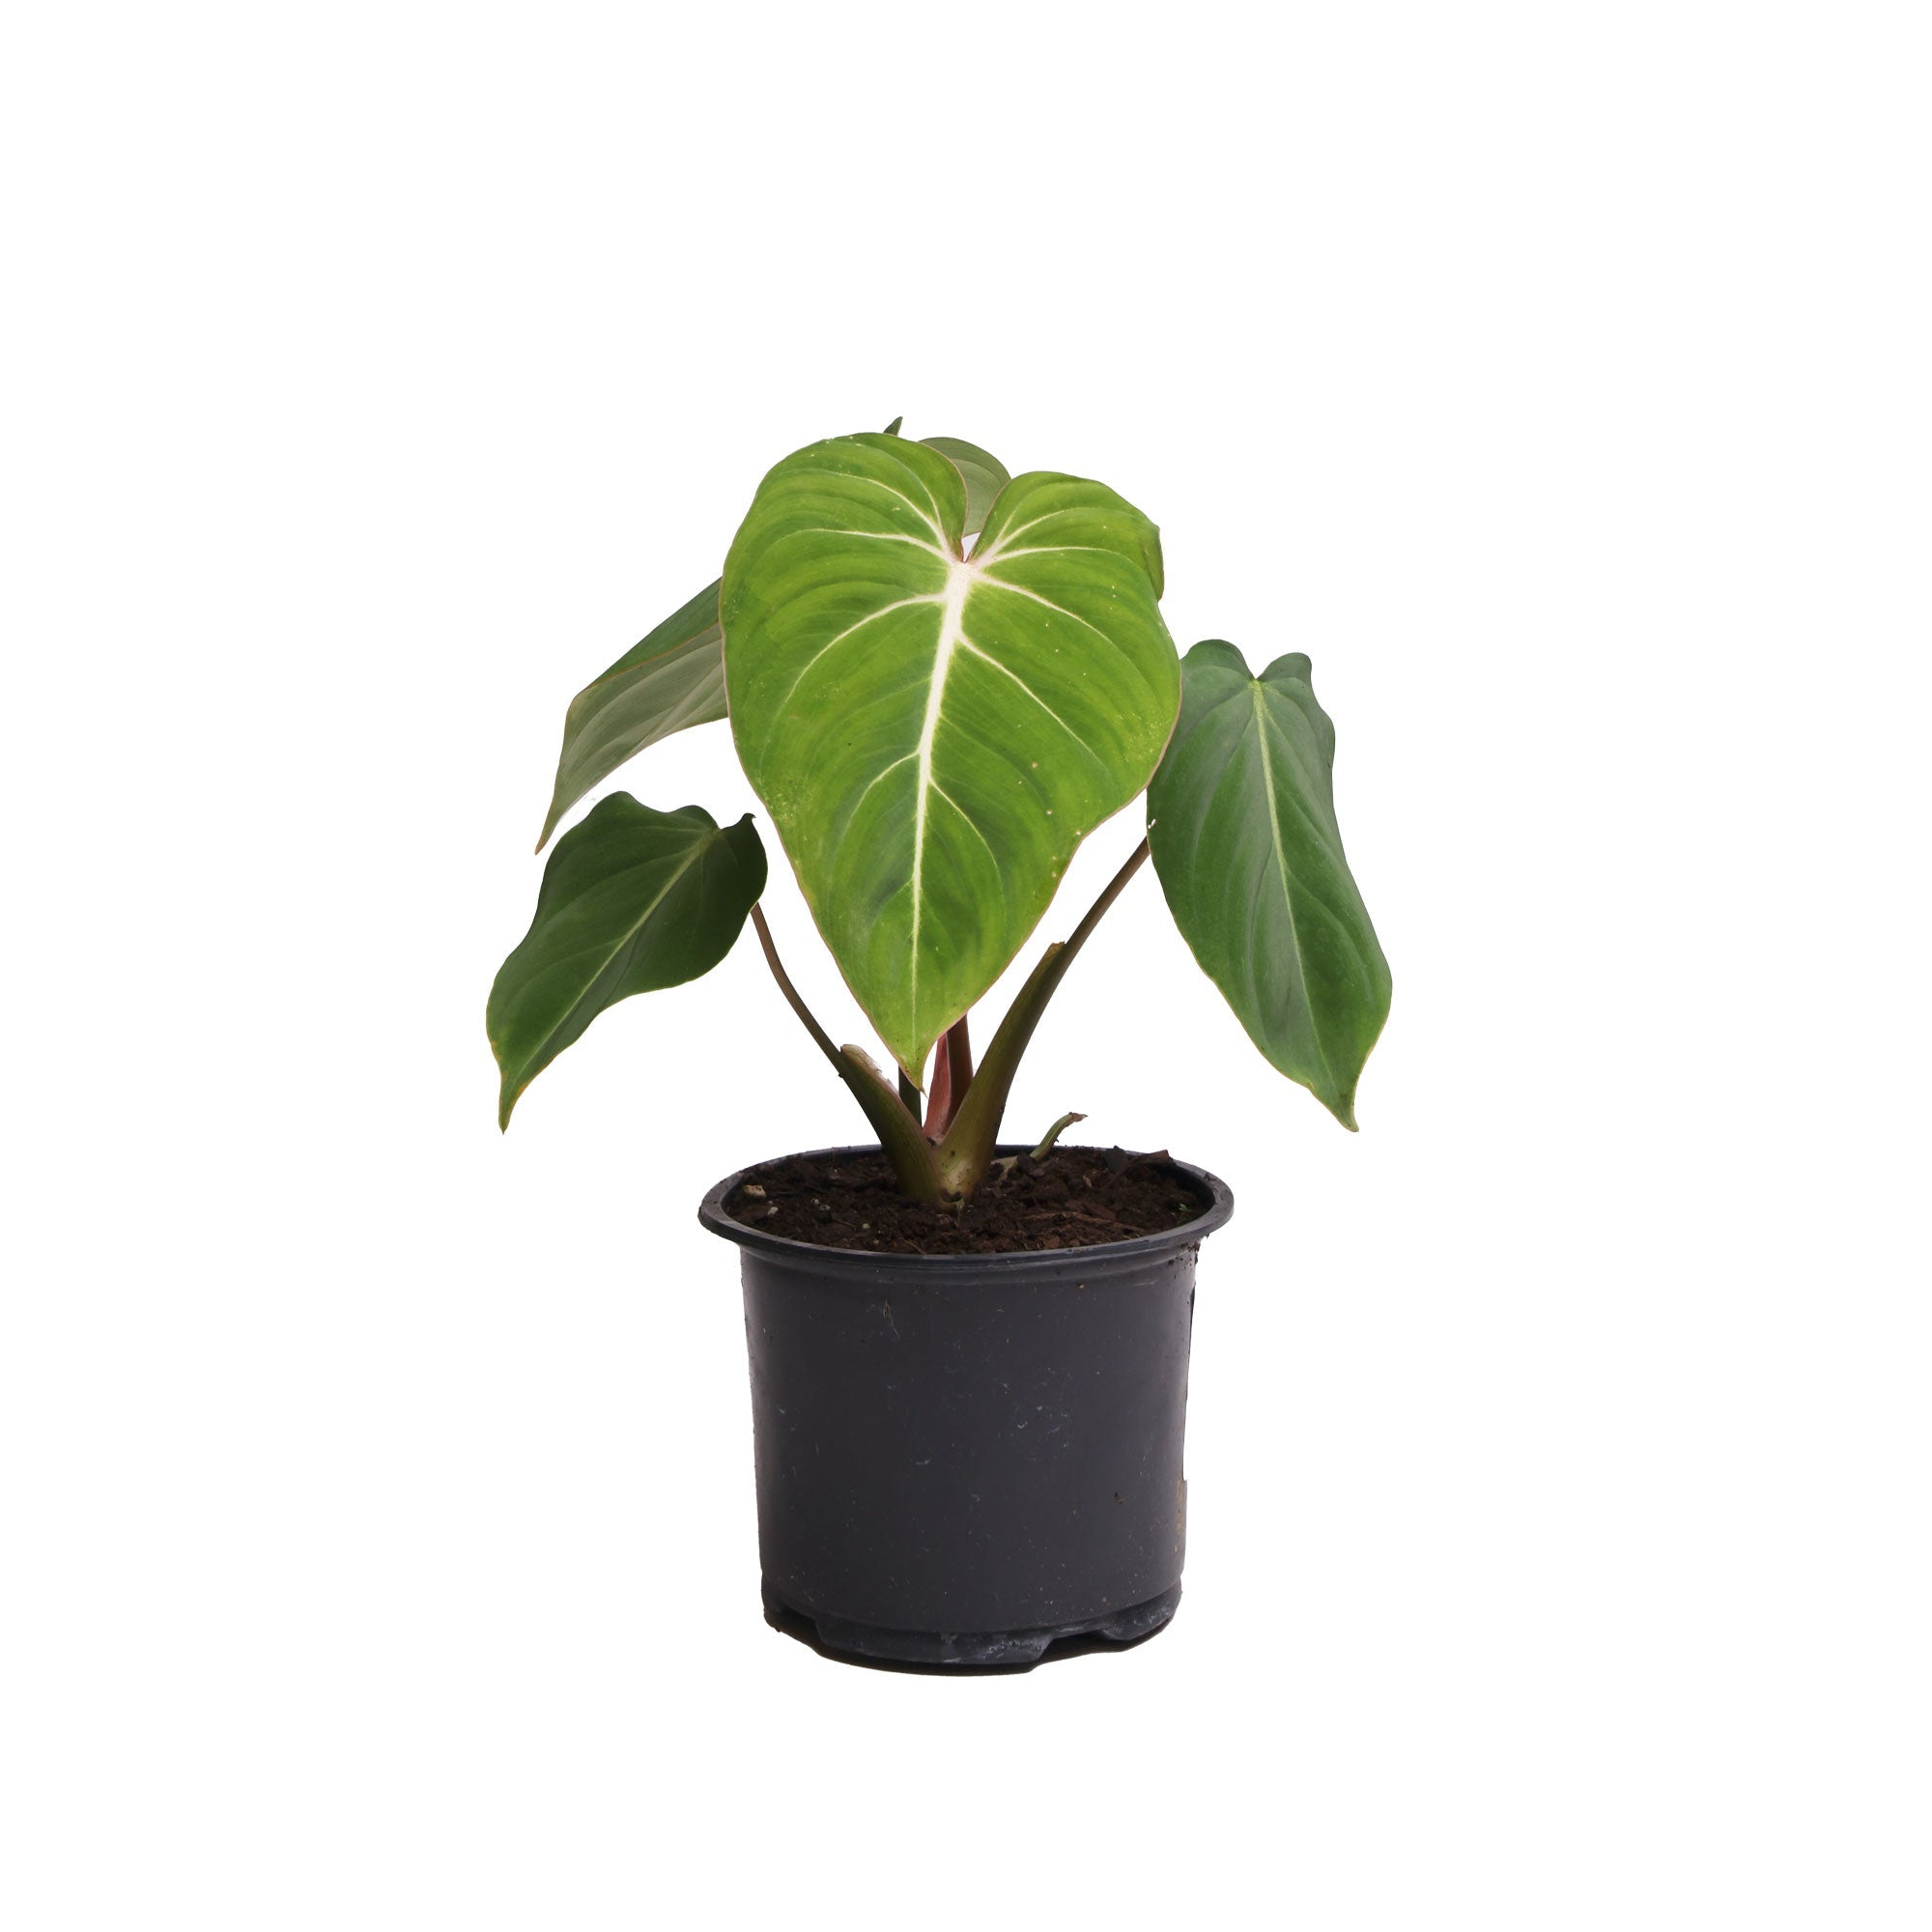 A small potted Philodendron Gloriosum 6 Inches by Chive Studio Canada with several heart-shaped, vibrant green leaves, showcased in a simple black plastic pot against a plain white background.